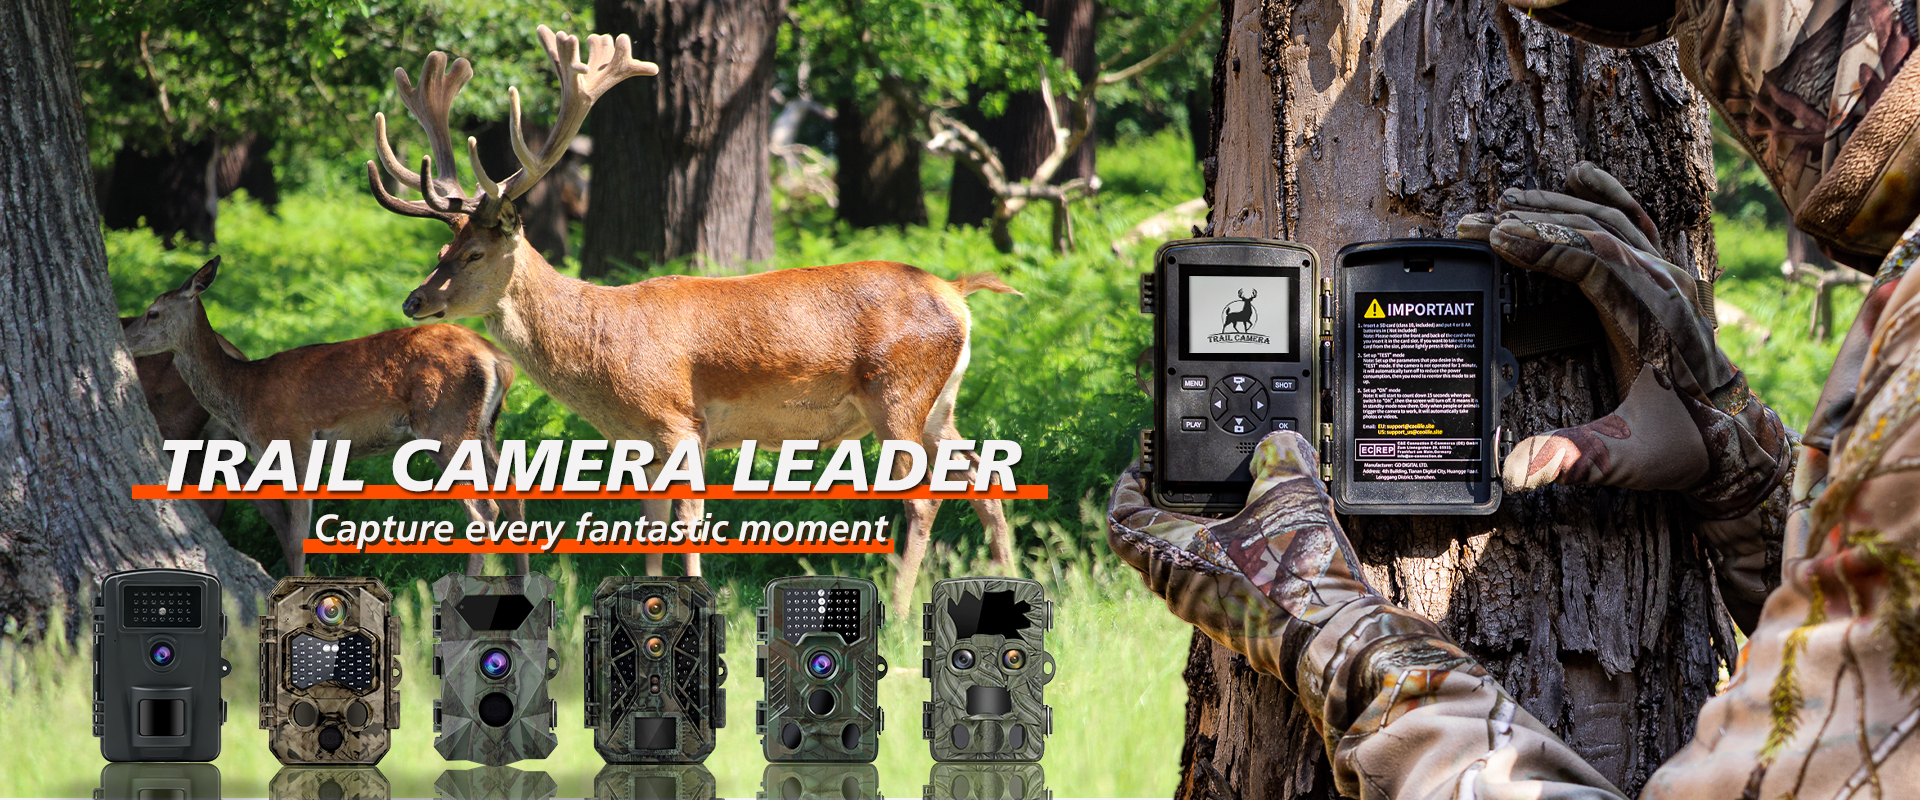 Coolife Trail Camera capture every fantastic wildlife moment day and night. Coolife banner